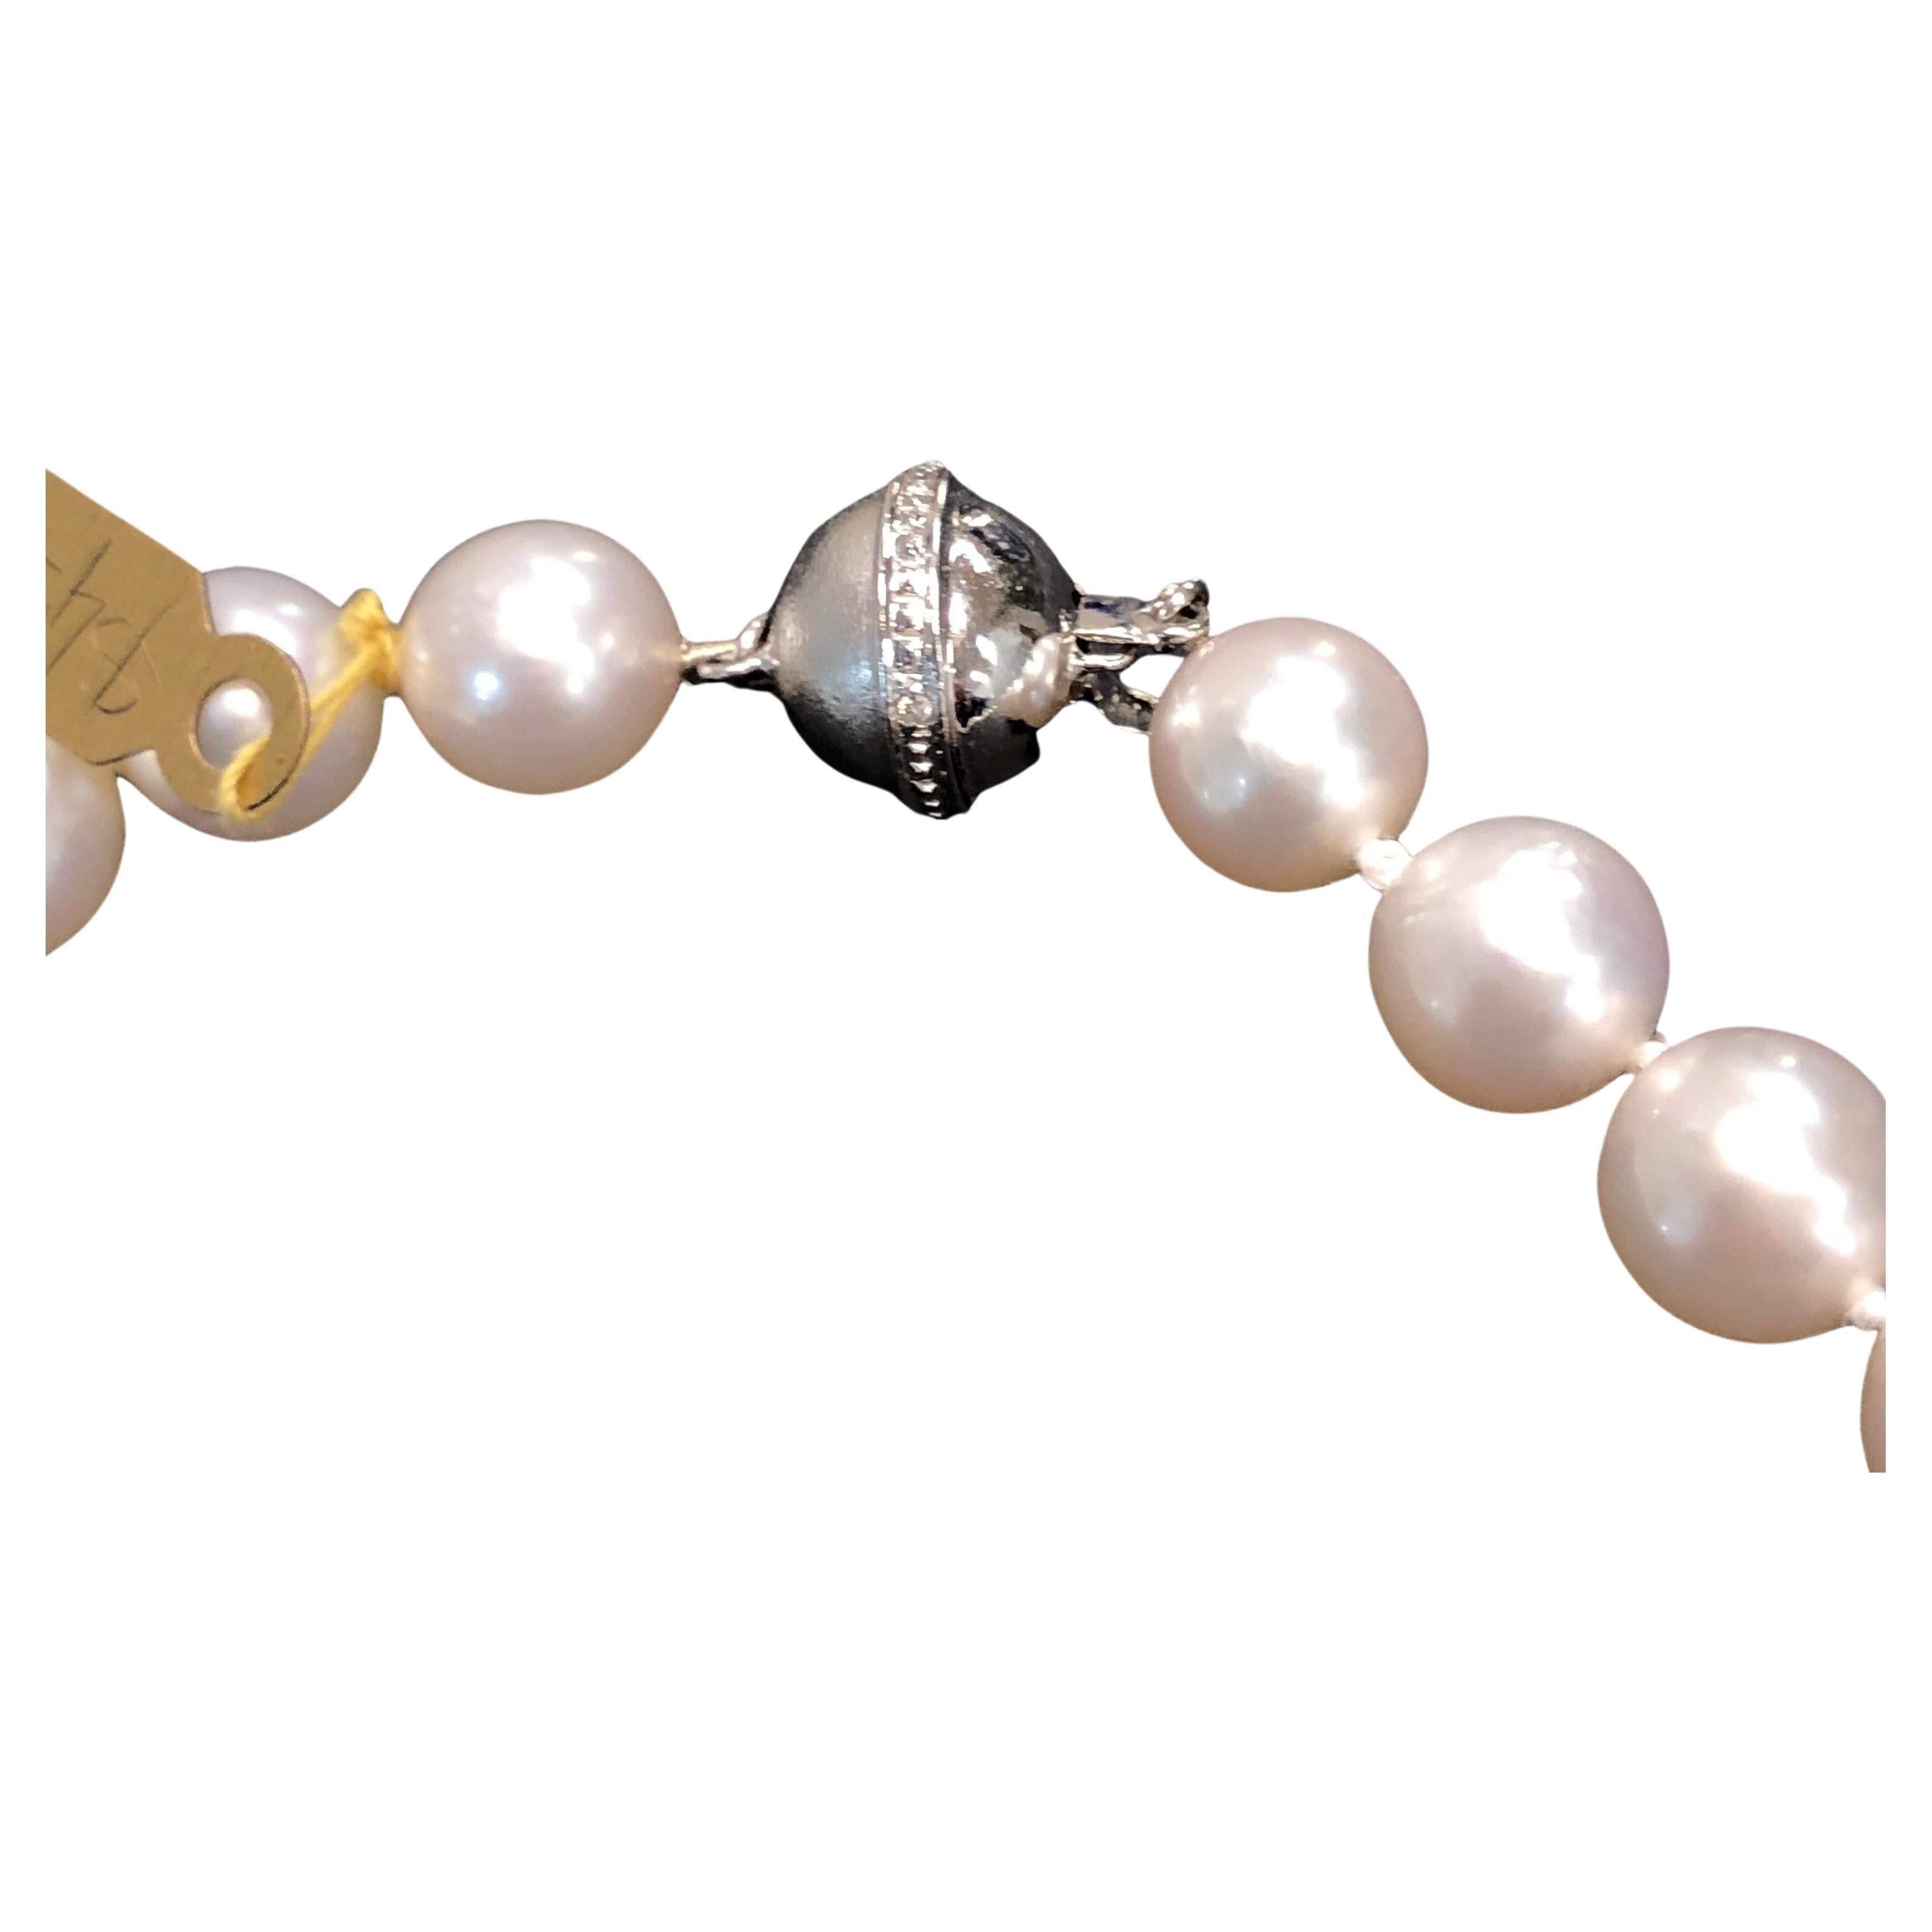 Silver-white South Sea pearl necklace.
Graduated round pearls from 8.7 mm to 12.5 mm in diameter.
Professionally strung notted and fitted with 14 carat white gold ball clasp,
11 mm in diameter in half poliched half matte finish
Necklace lenght is 49